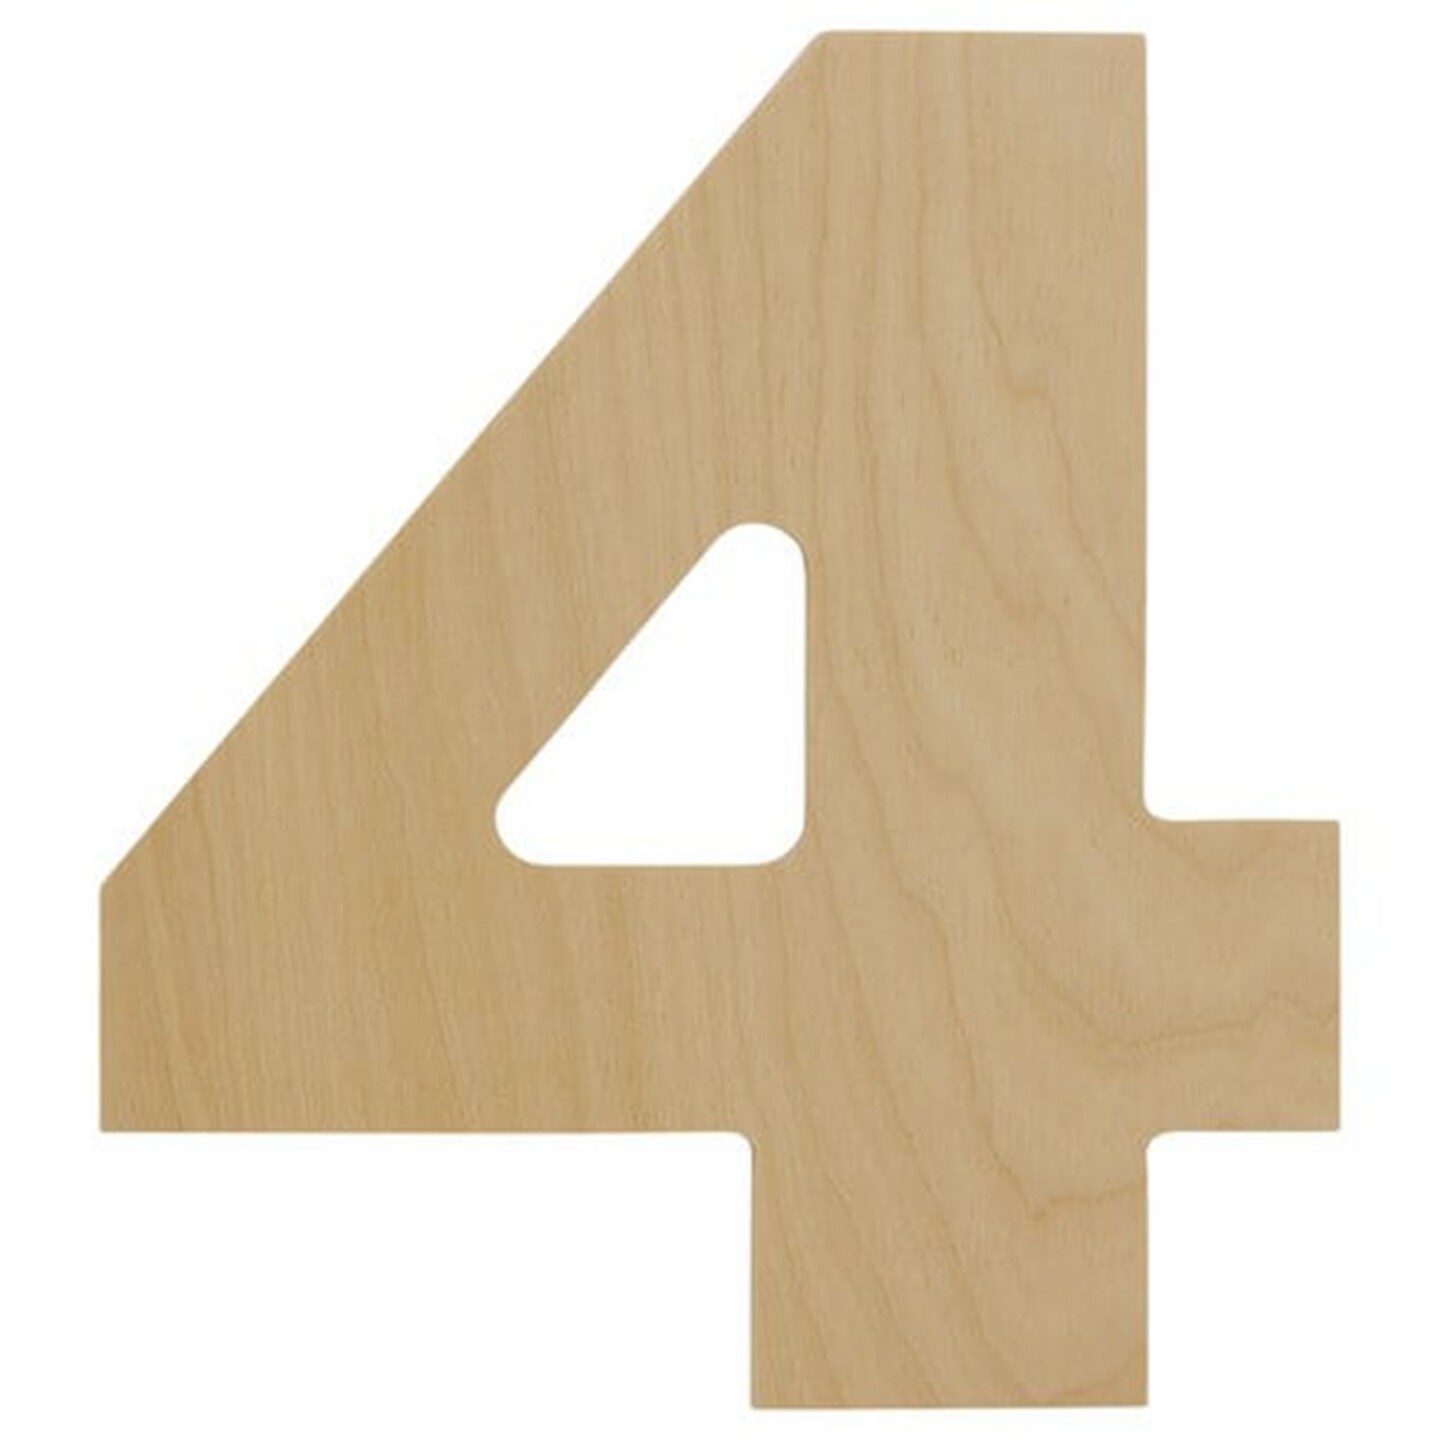 Wooden Number 4, 12 inch or 8 inch, Unfinished Large Wood Numbers for Crafts | Woodpeckers